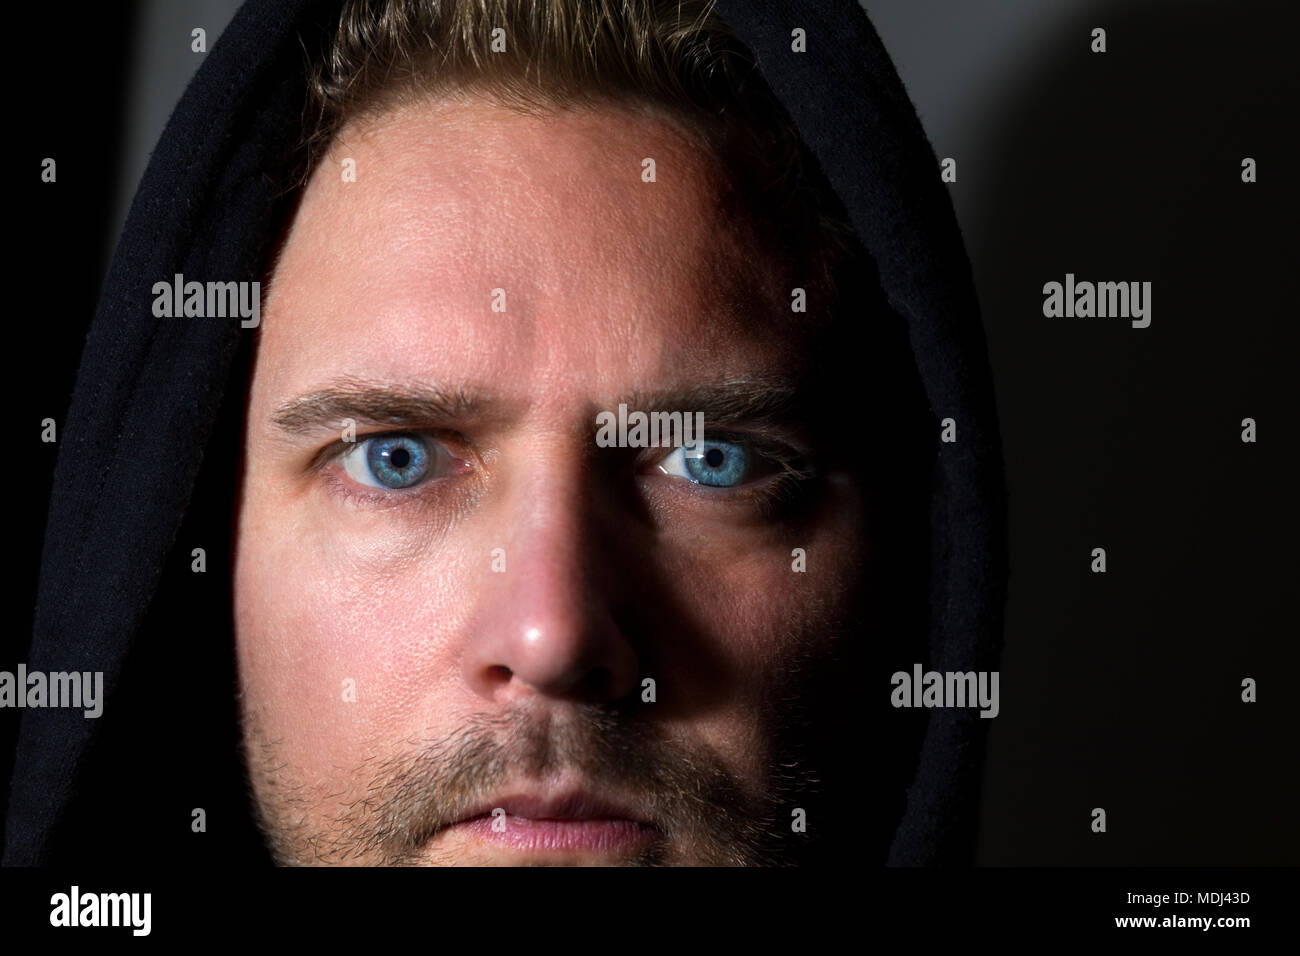 Close up face portrait of mid adult caucasian man with striking piercing blue eyes against a dark background  Model Release: Yes. Property Release: No. Stock Photo